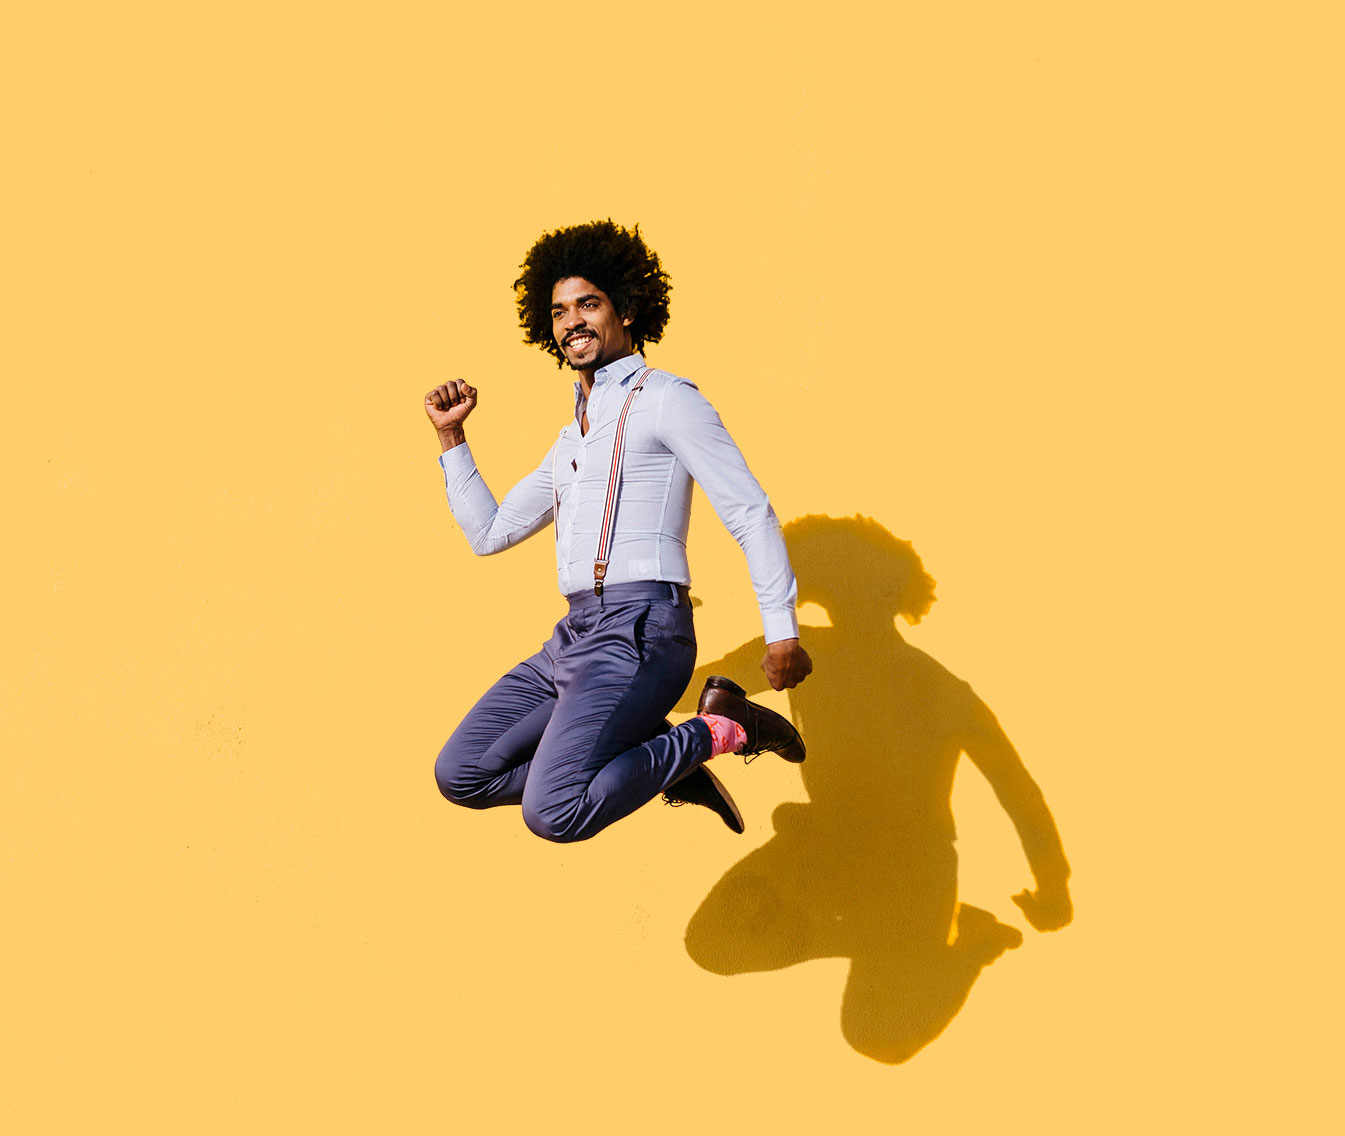 A man in suspenders jumping in the air behind a yellow background